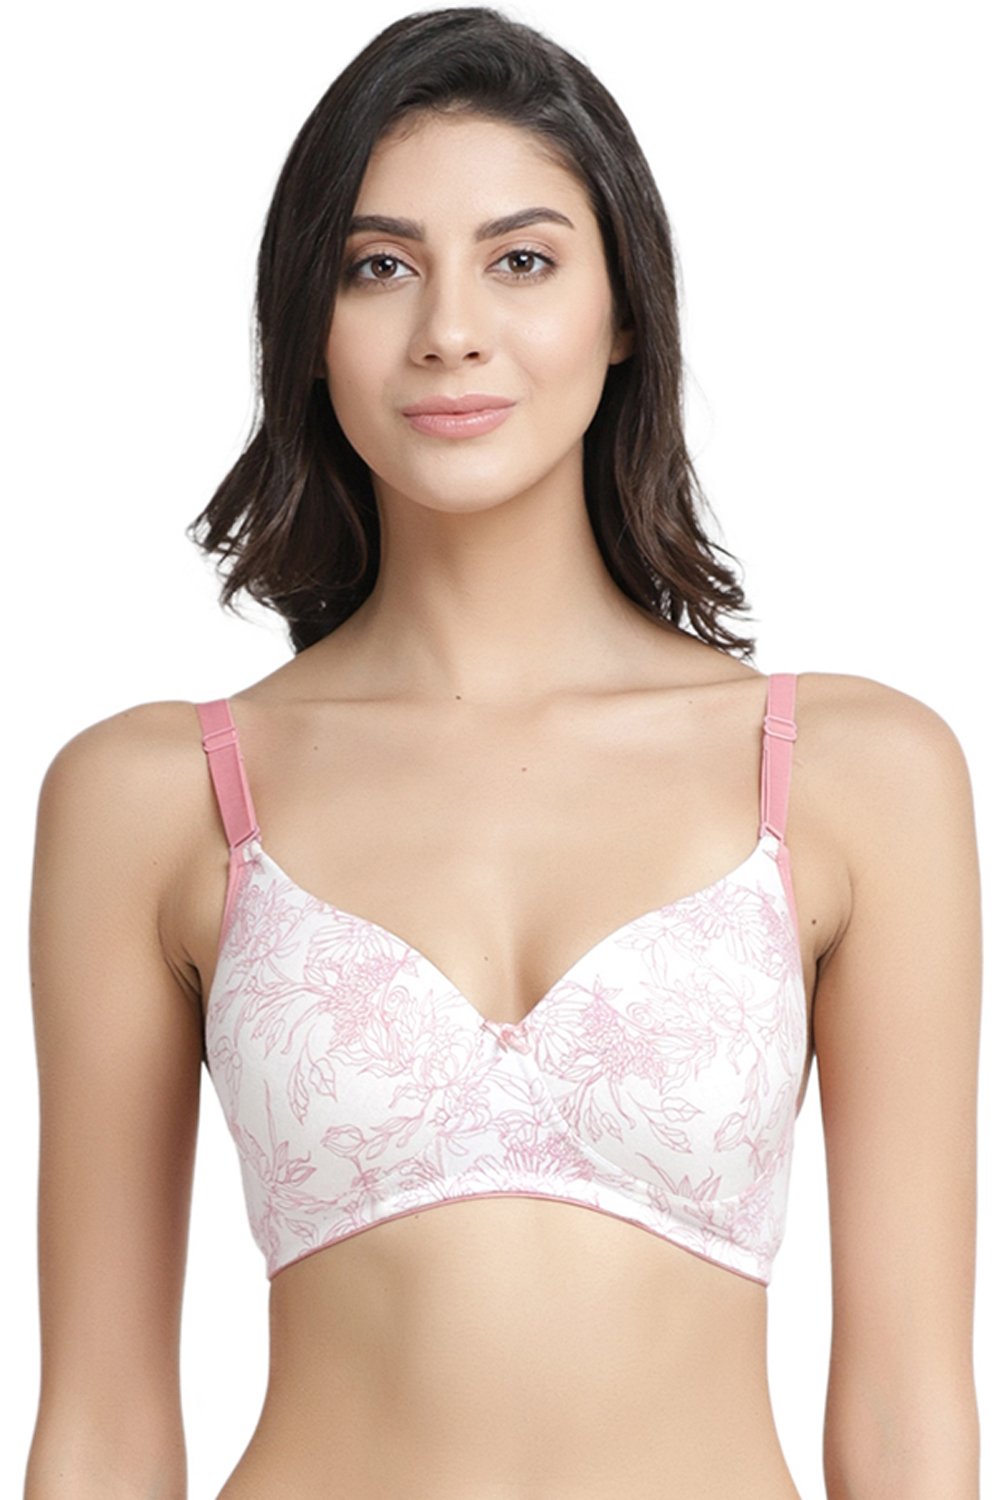 InnerSense Women's Organic Cotton Antimicrobial Seamless Side Support Bra -  Pink